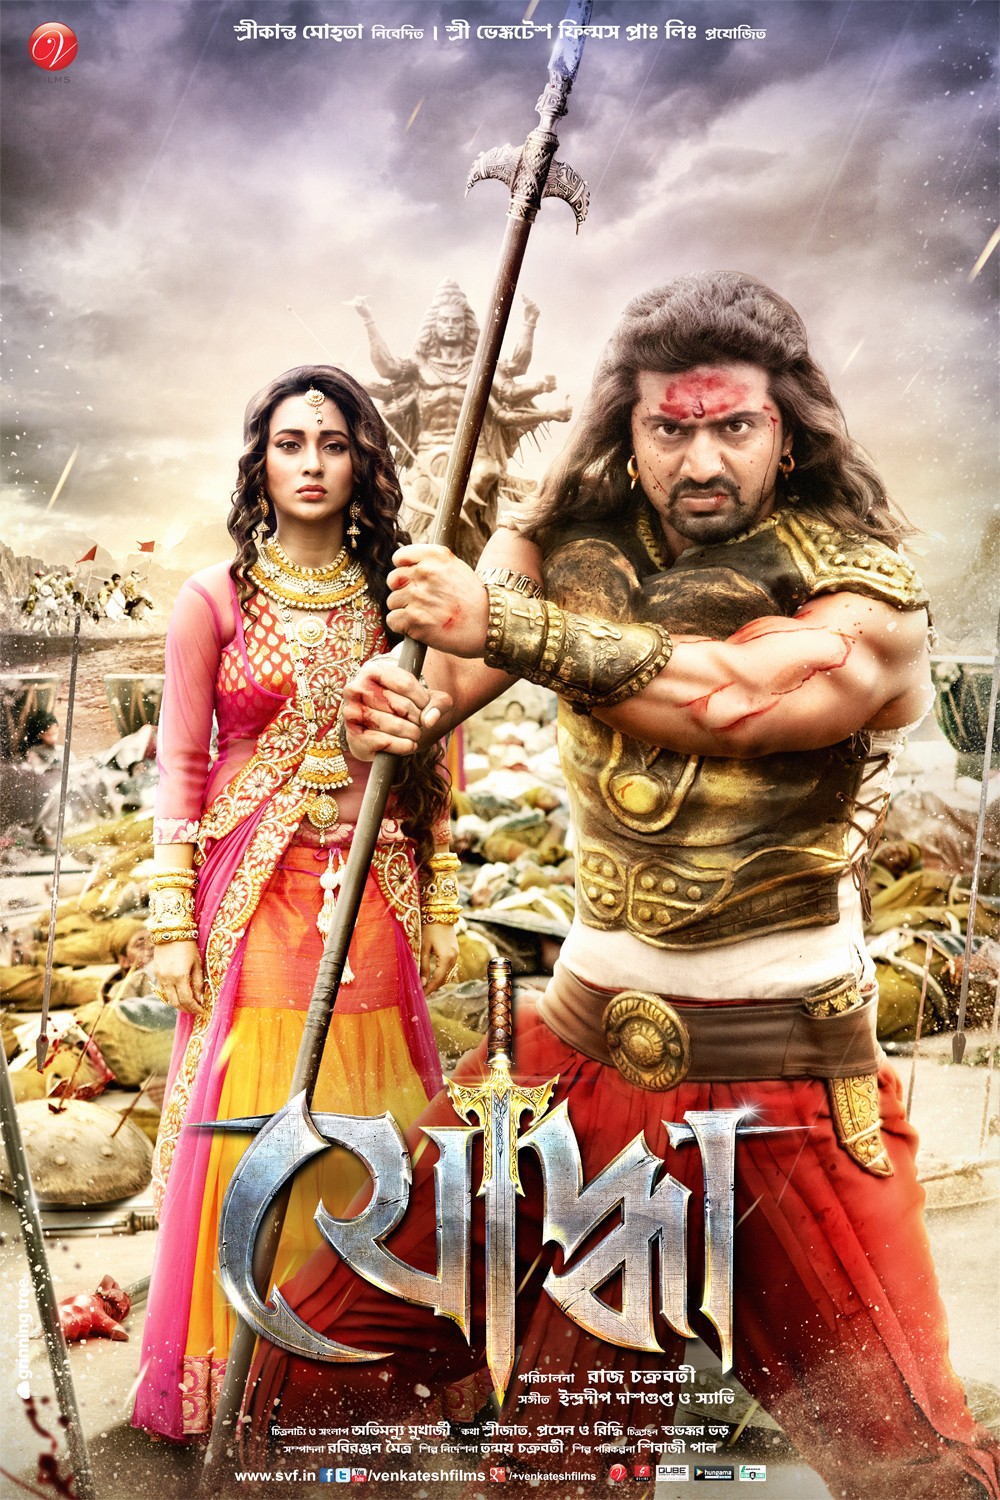 Extra Large Movie Poster Image for Yoddha The Warrior (#3 of 7)